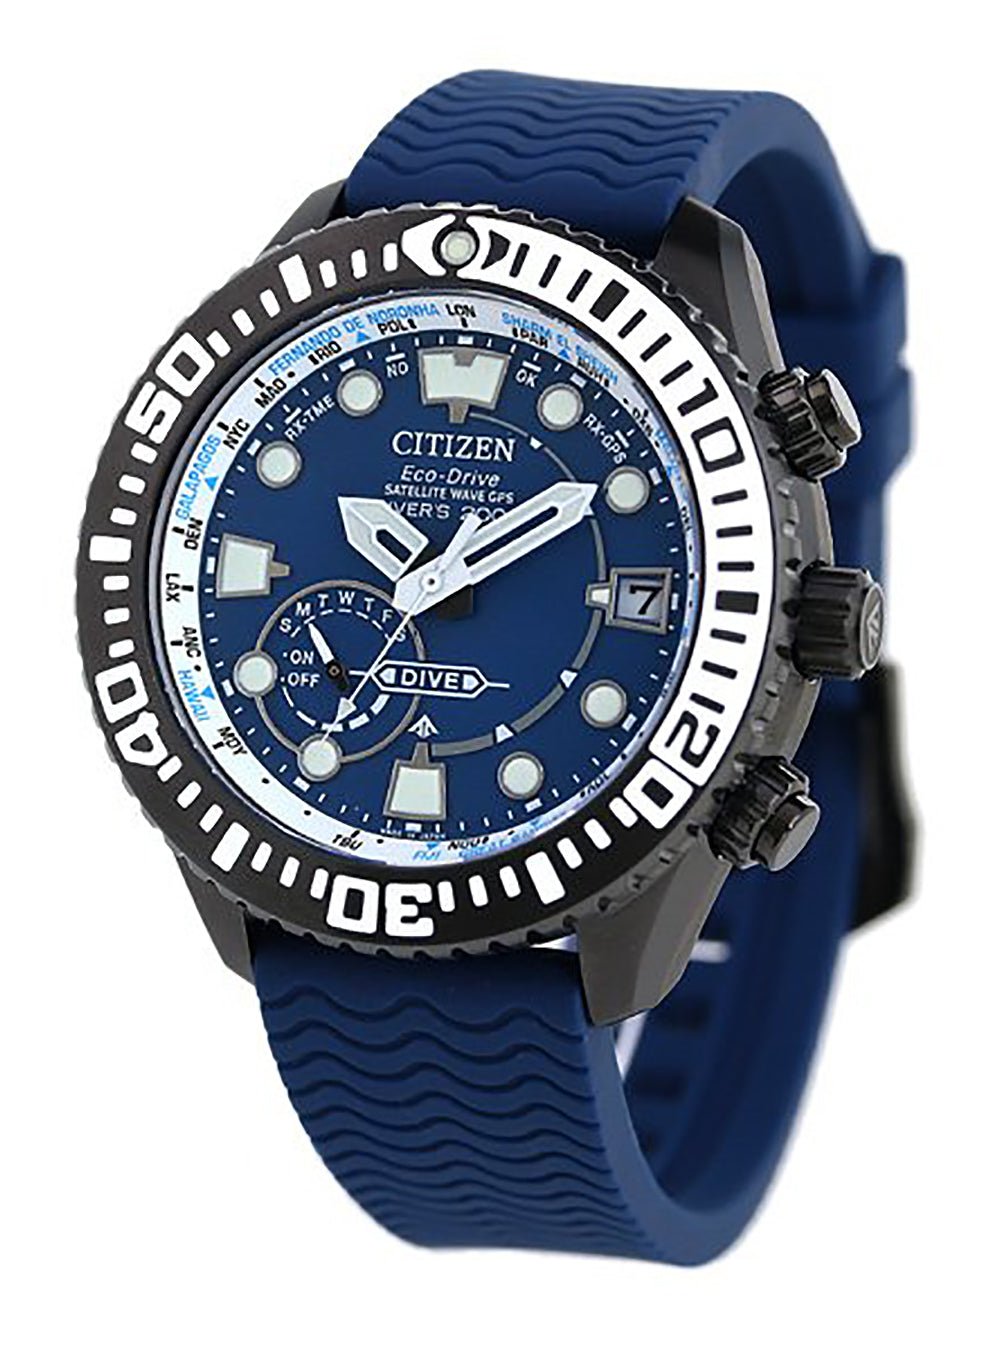 GPS CC5006-06L Promaster Dive in japan-select Citizen – Watch Made | Japan